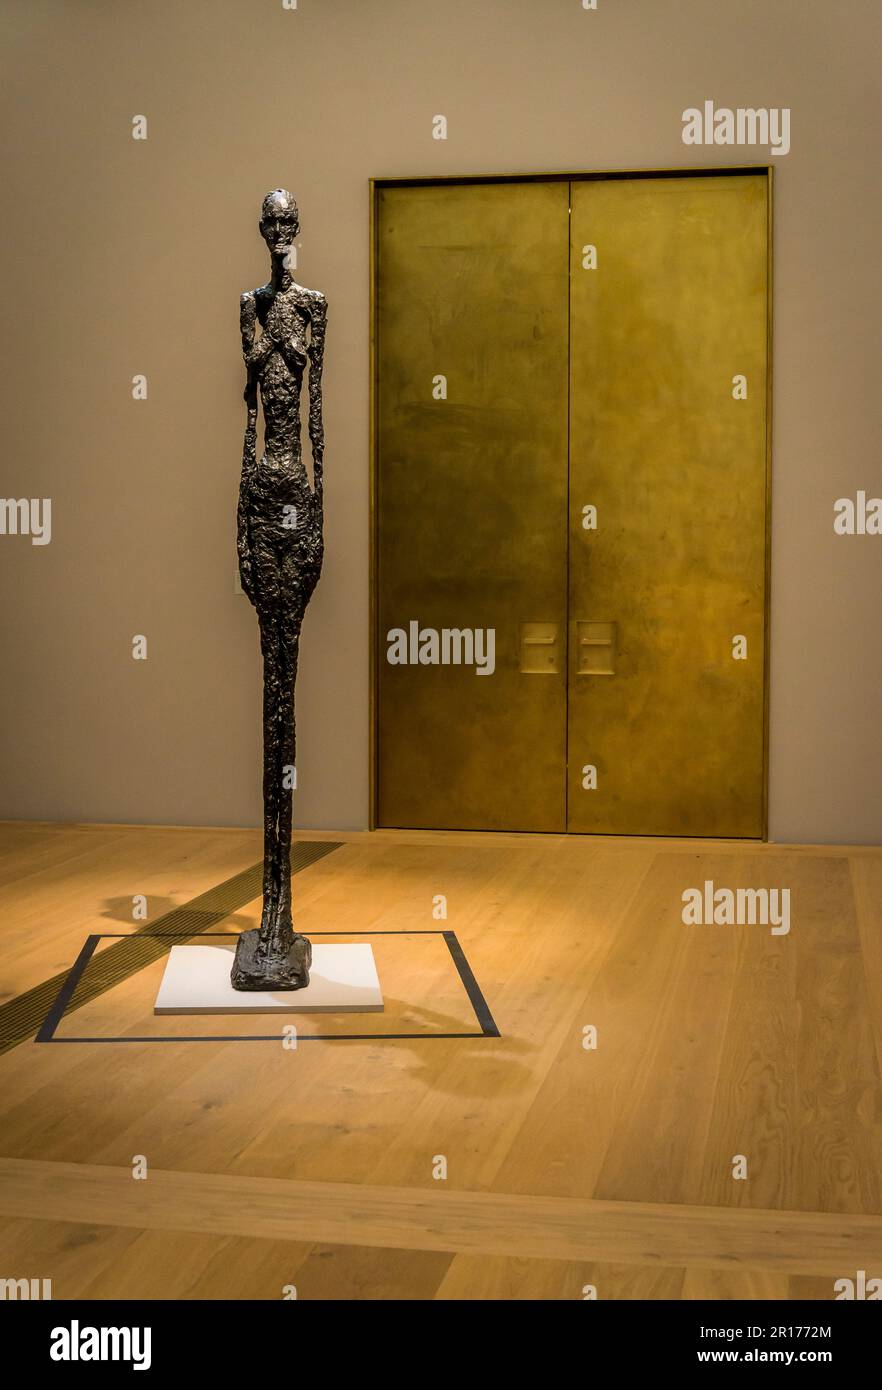 Sculpture by Alberto Giacometti, Kunsthaus, Museum of Art, Old Building, Zurich, Switzerland Stock Photo